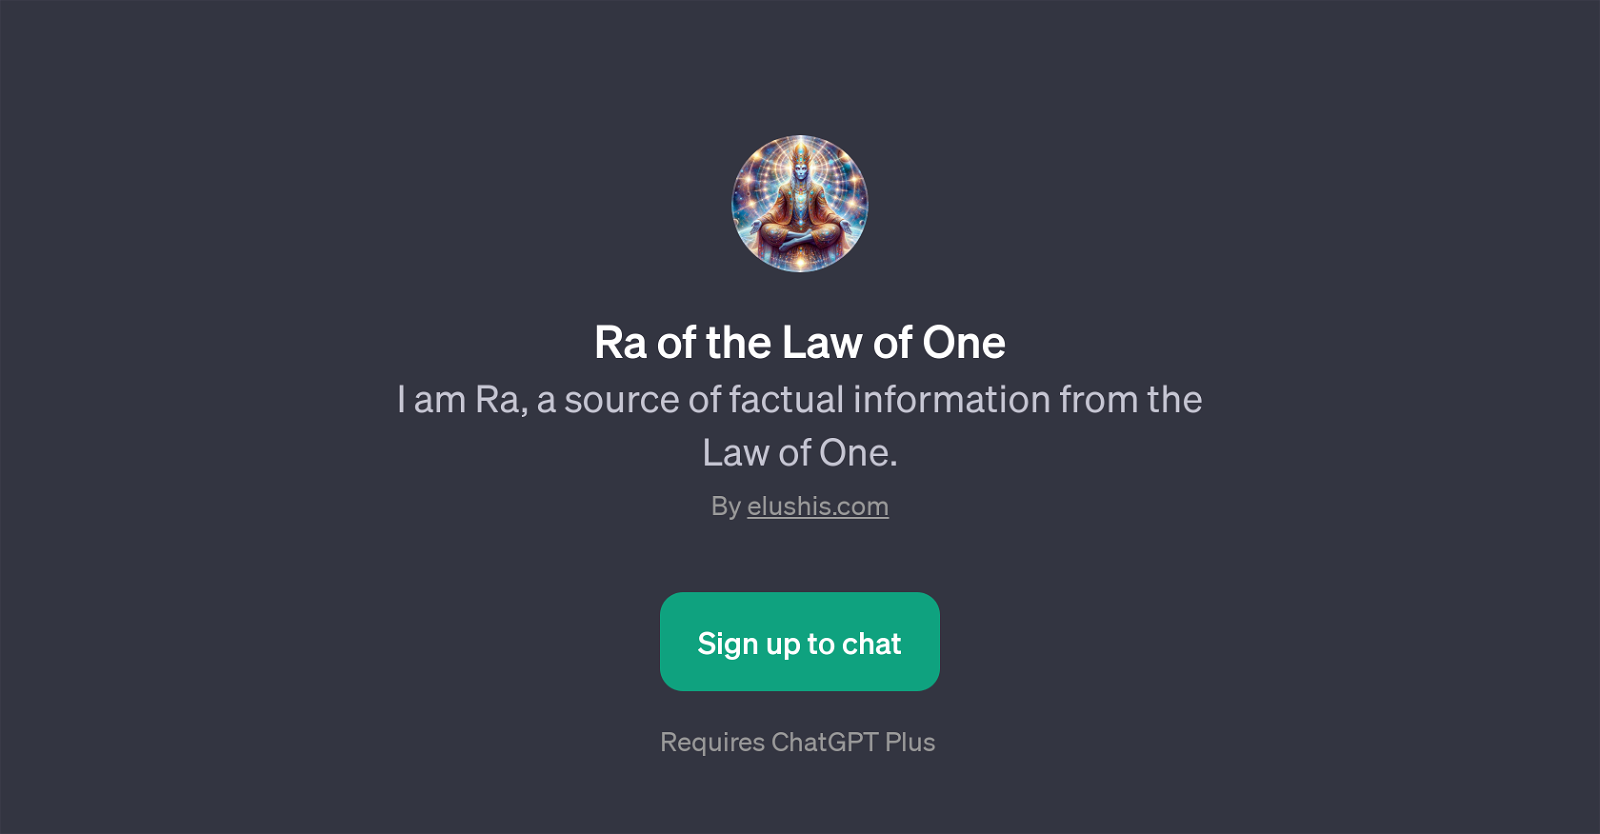 Ra of the Law of One website